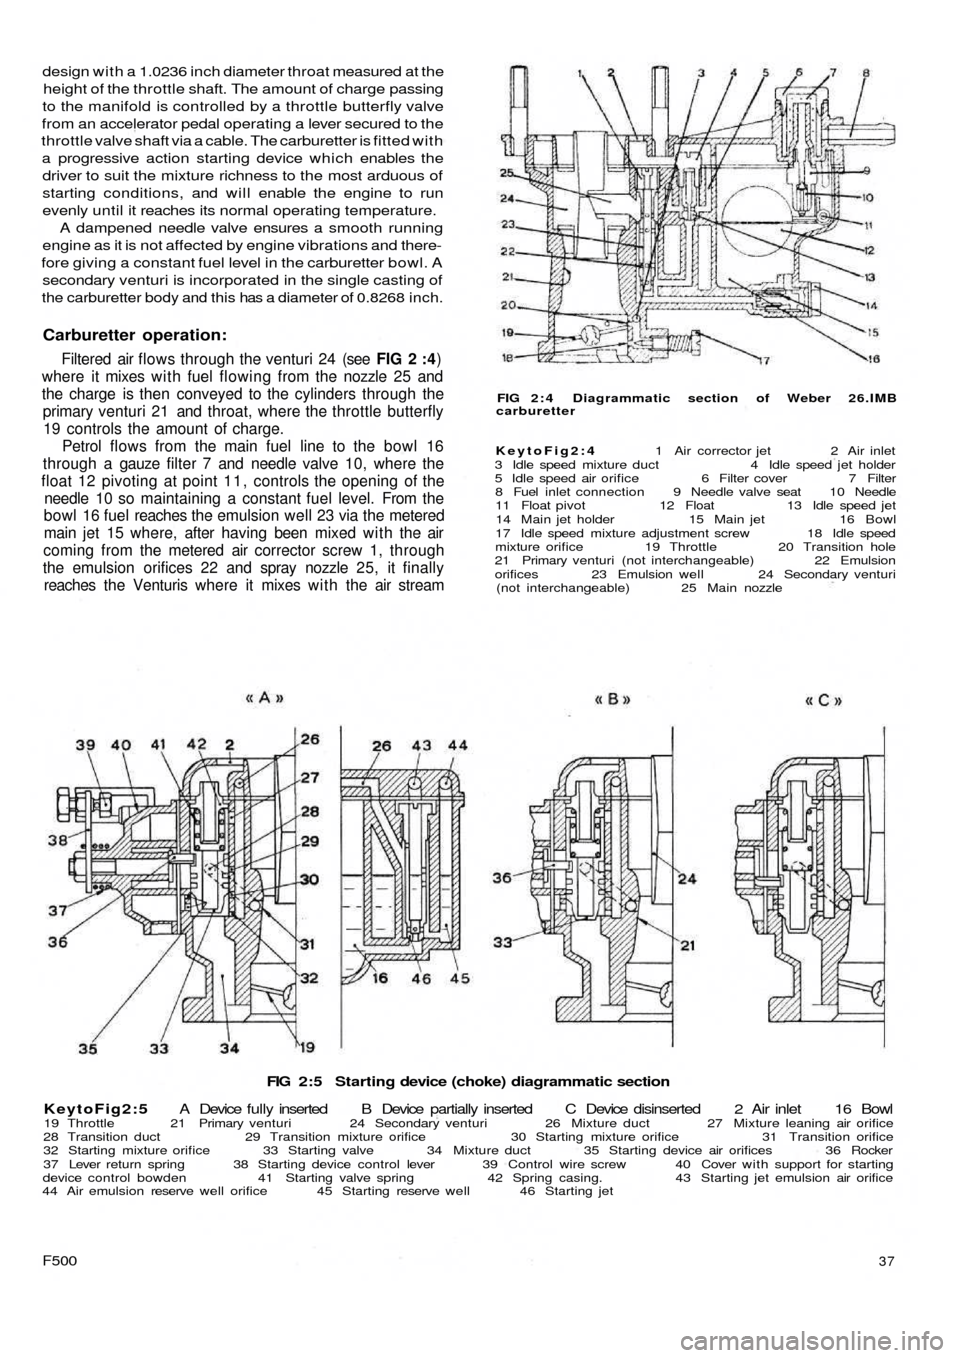 FIAT 500 1969 1.G Owners Manual FIG 2:5  Starting device (choke) diagrammatic section
KeytoFig2:5 A  Device  fully inserted  B  Device  partially  inserted  C  Device  disinserted  2  Air  inlet 16 Bowl
19 Throttle  21 Primary ventu